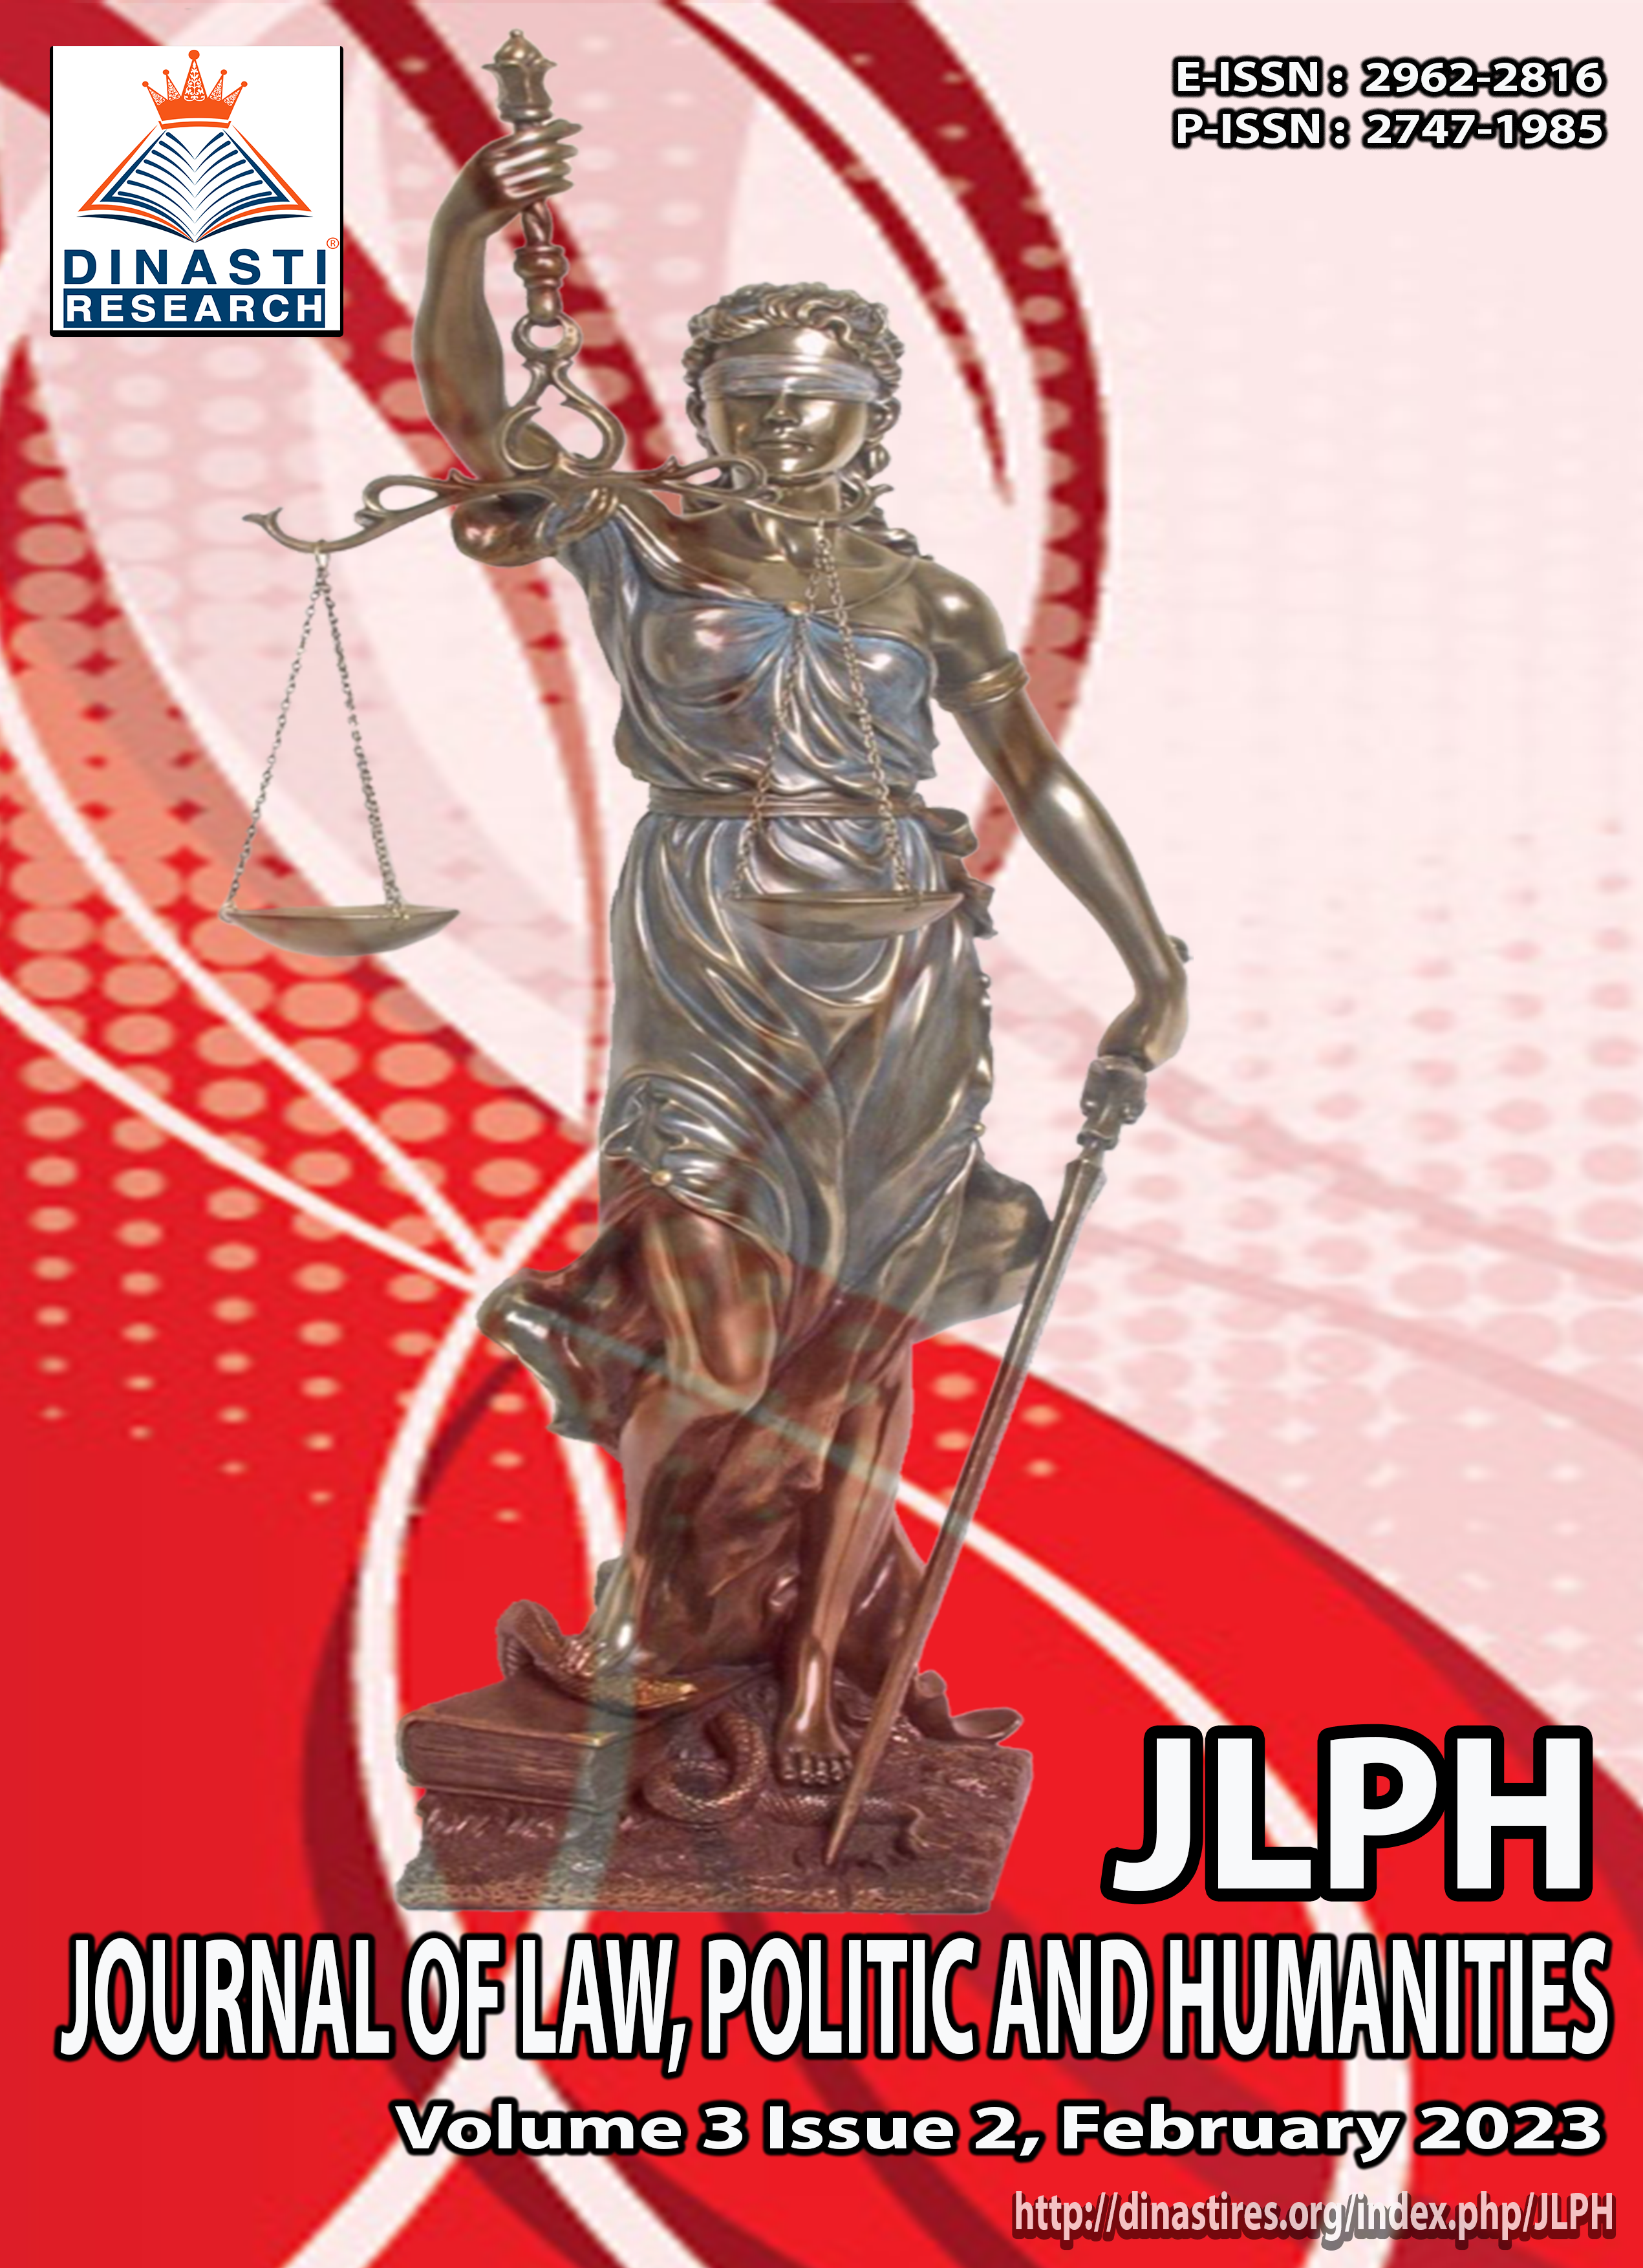 					View Vol. 3 No. 2 (2023): (JLPH) Journal of Law, Politic and Humanities (February 2023)
				